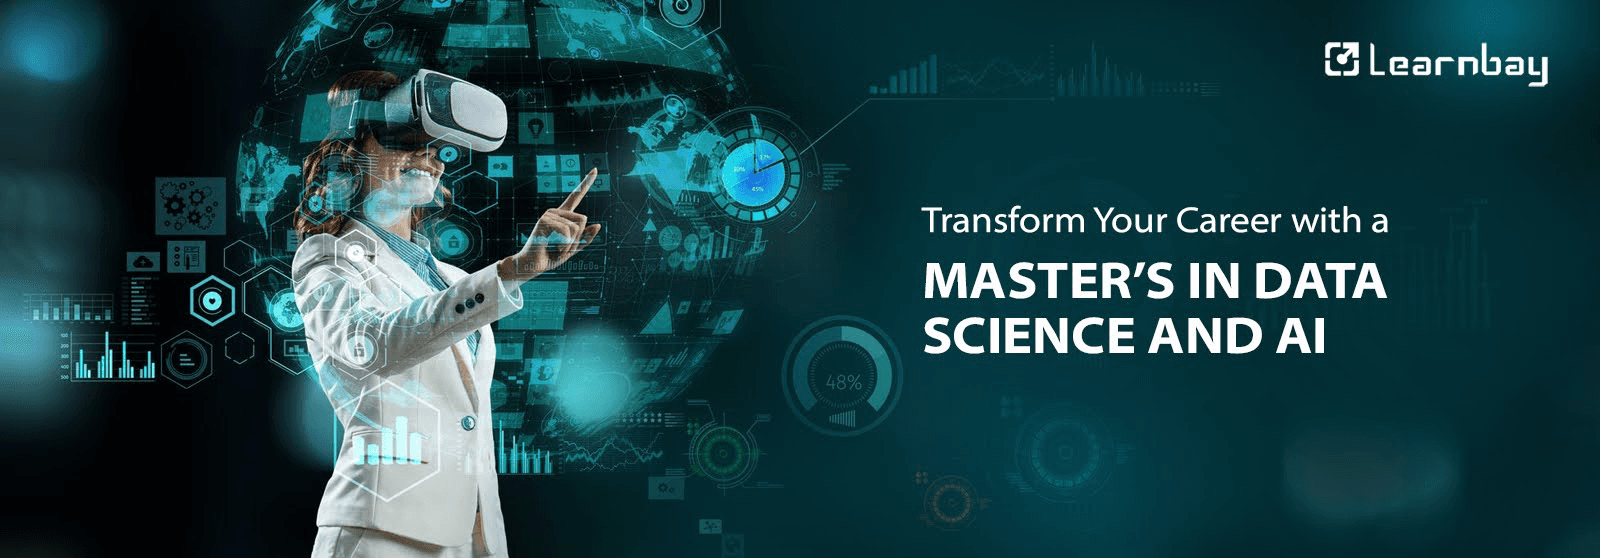 data science online course, master's degree in data science and AI